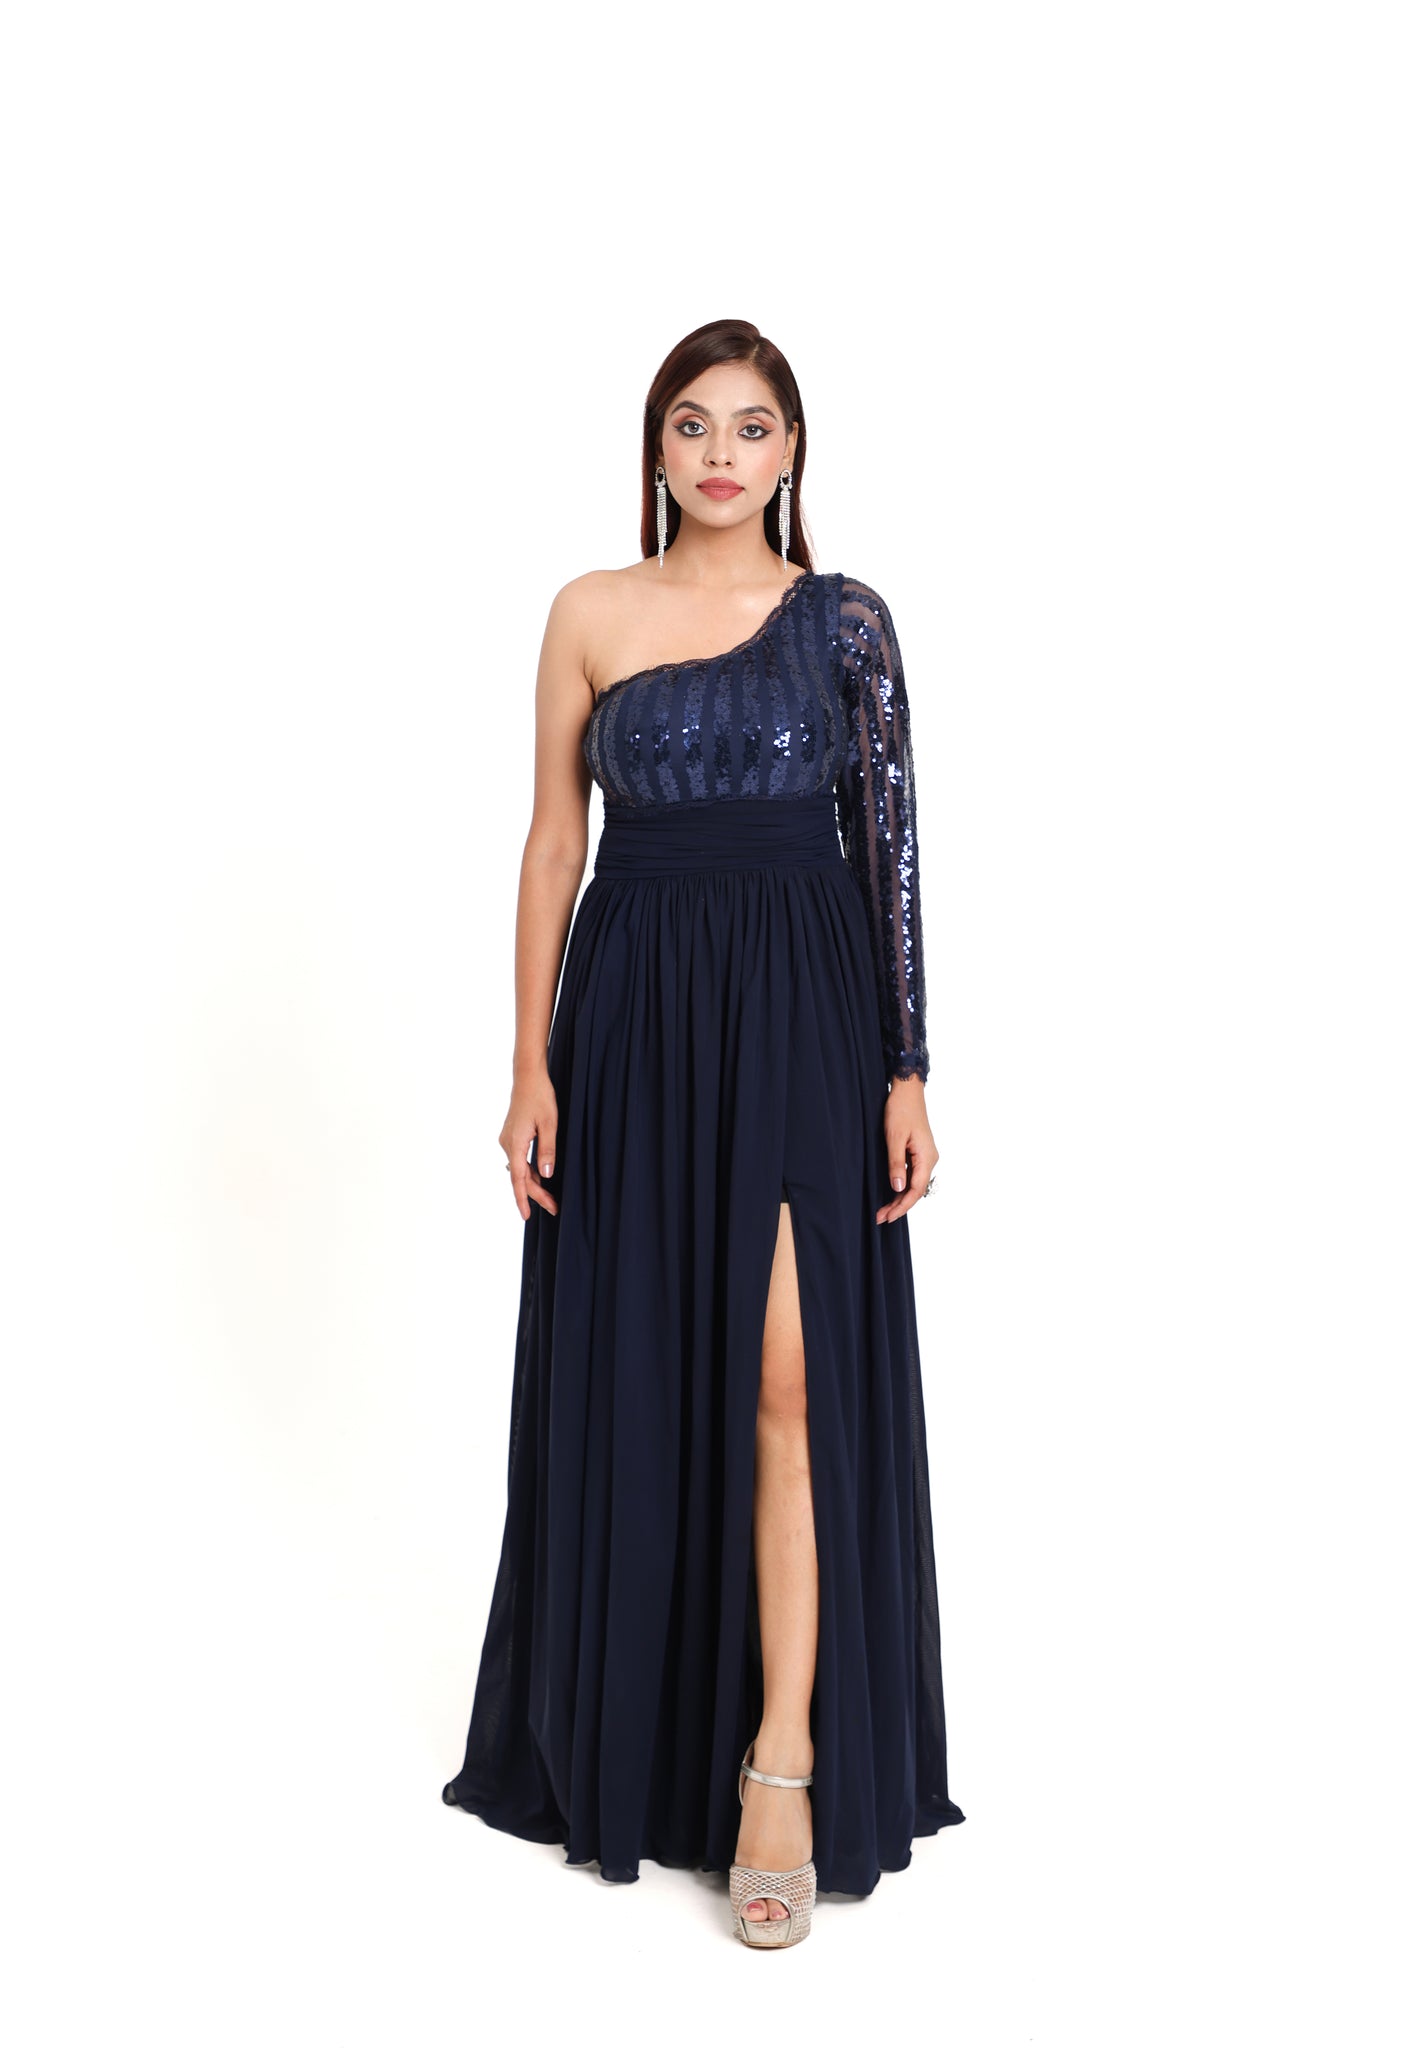 Off-Shoulder Sequin High Slit Gown in Black - Retro, Indie and Unique  Fashion